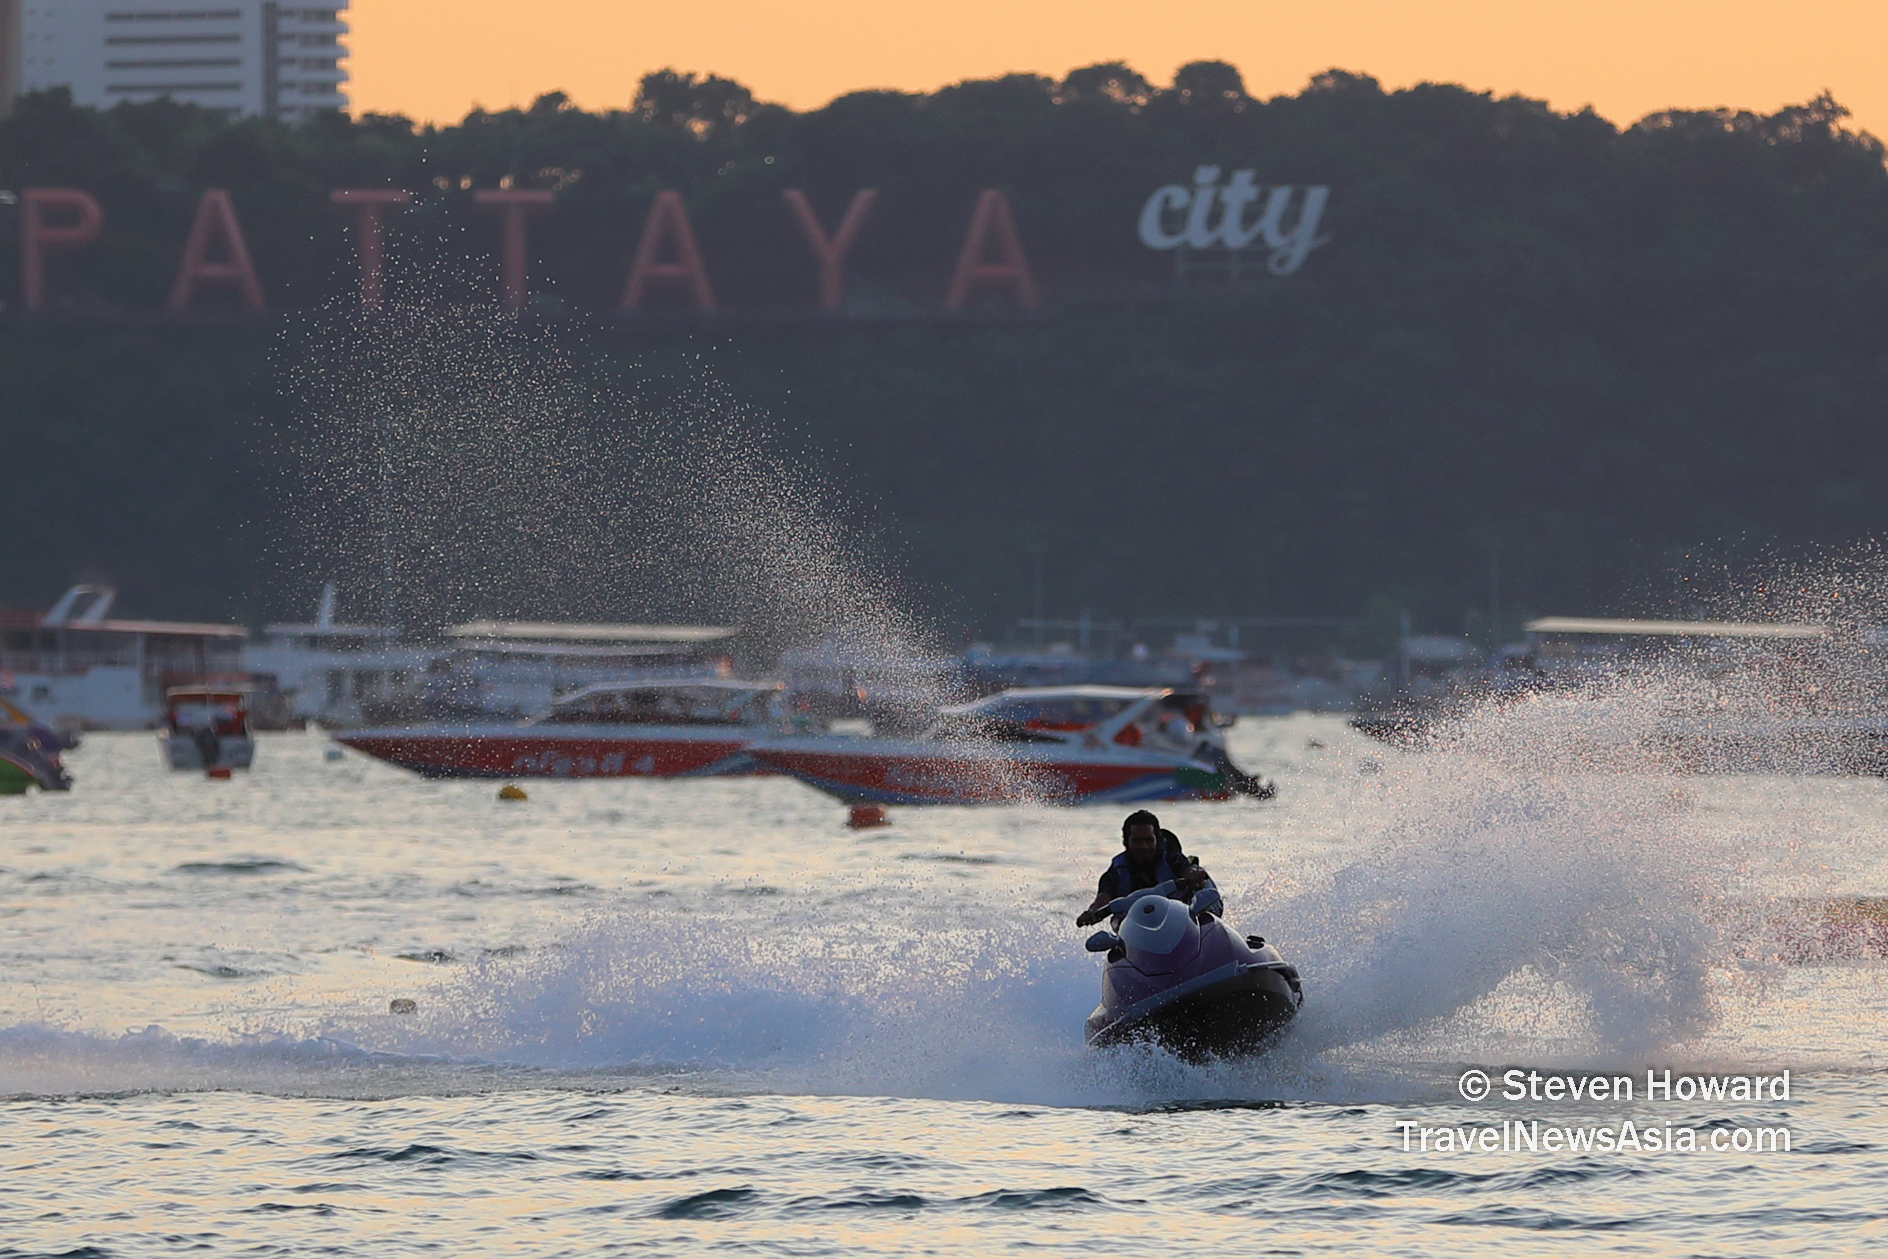 Tourists having fun on a jetski in Pattaya, Thailand. Picture by Steven Howard of TravelNewsAsia.com Click to enlarge.